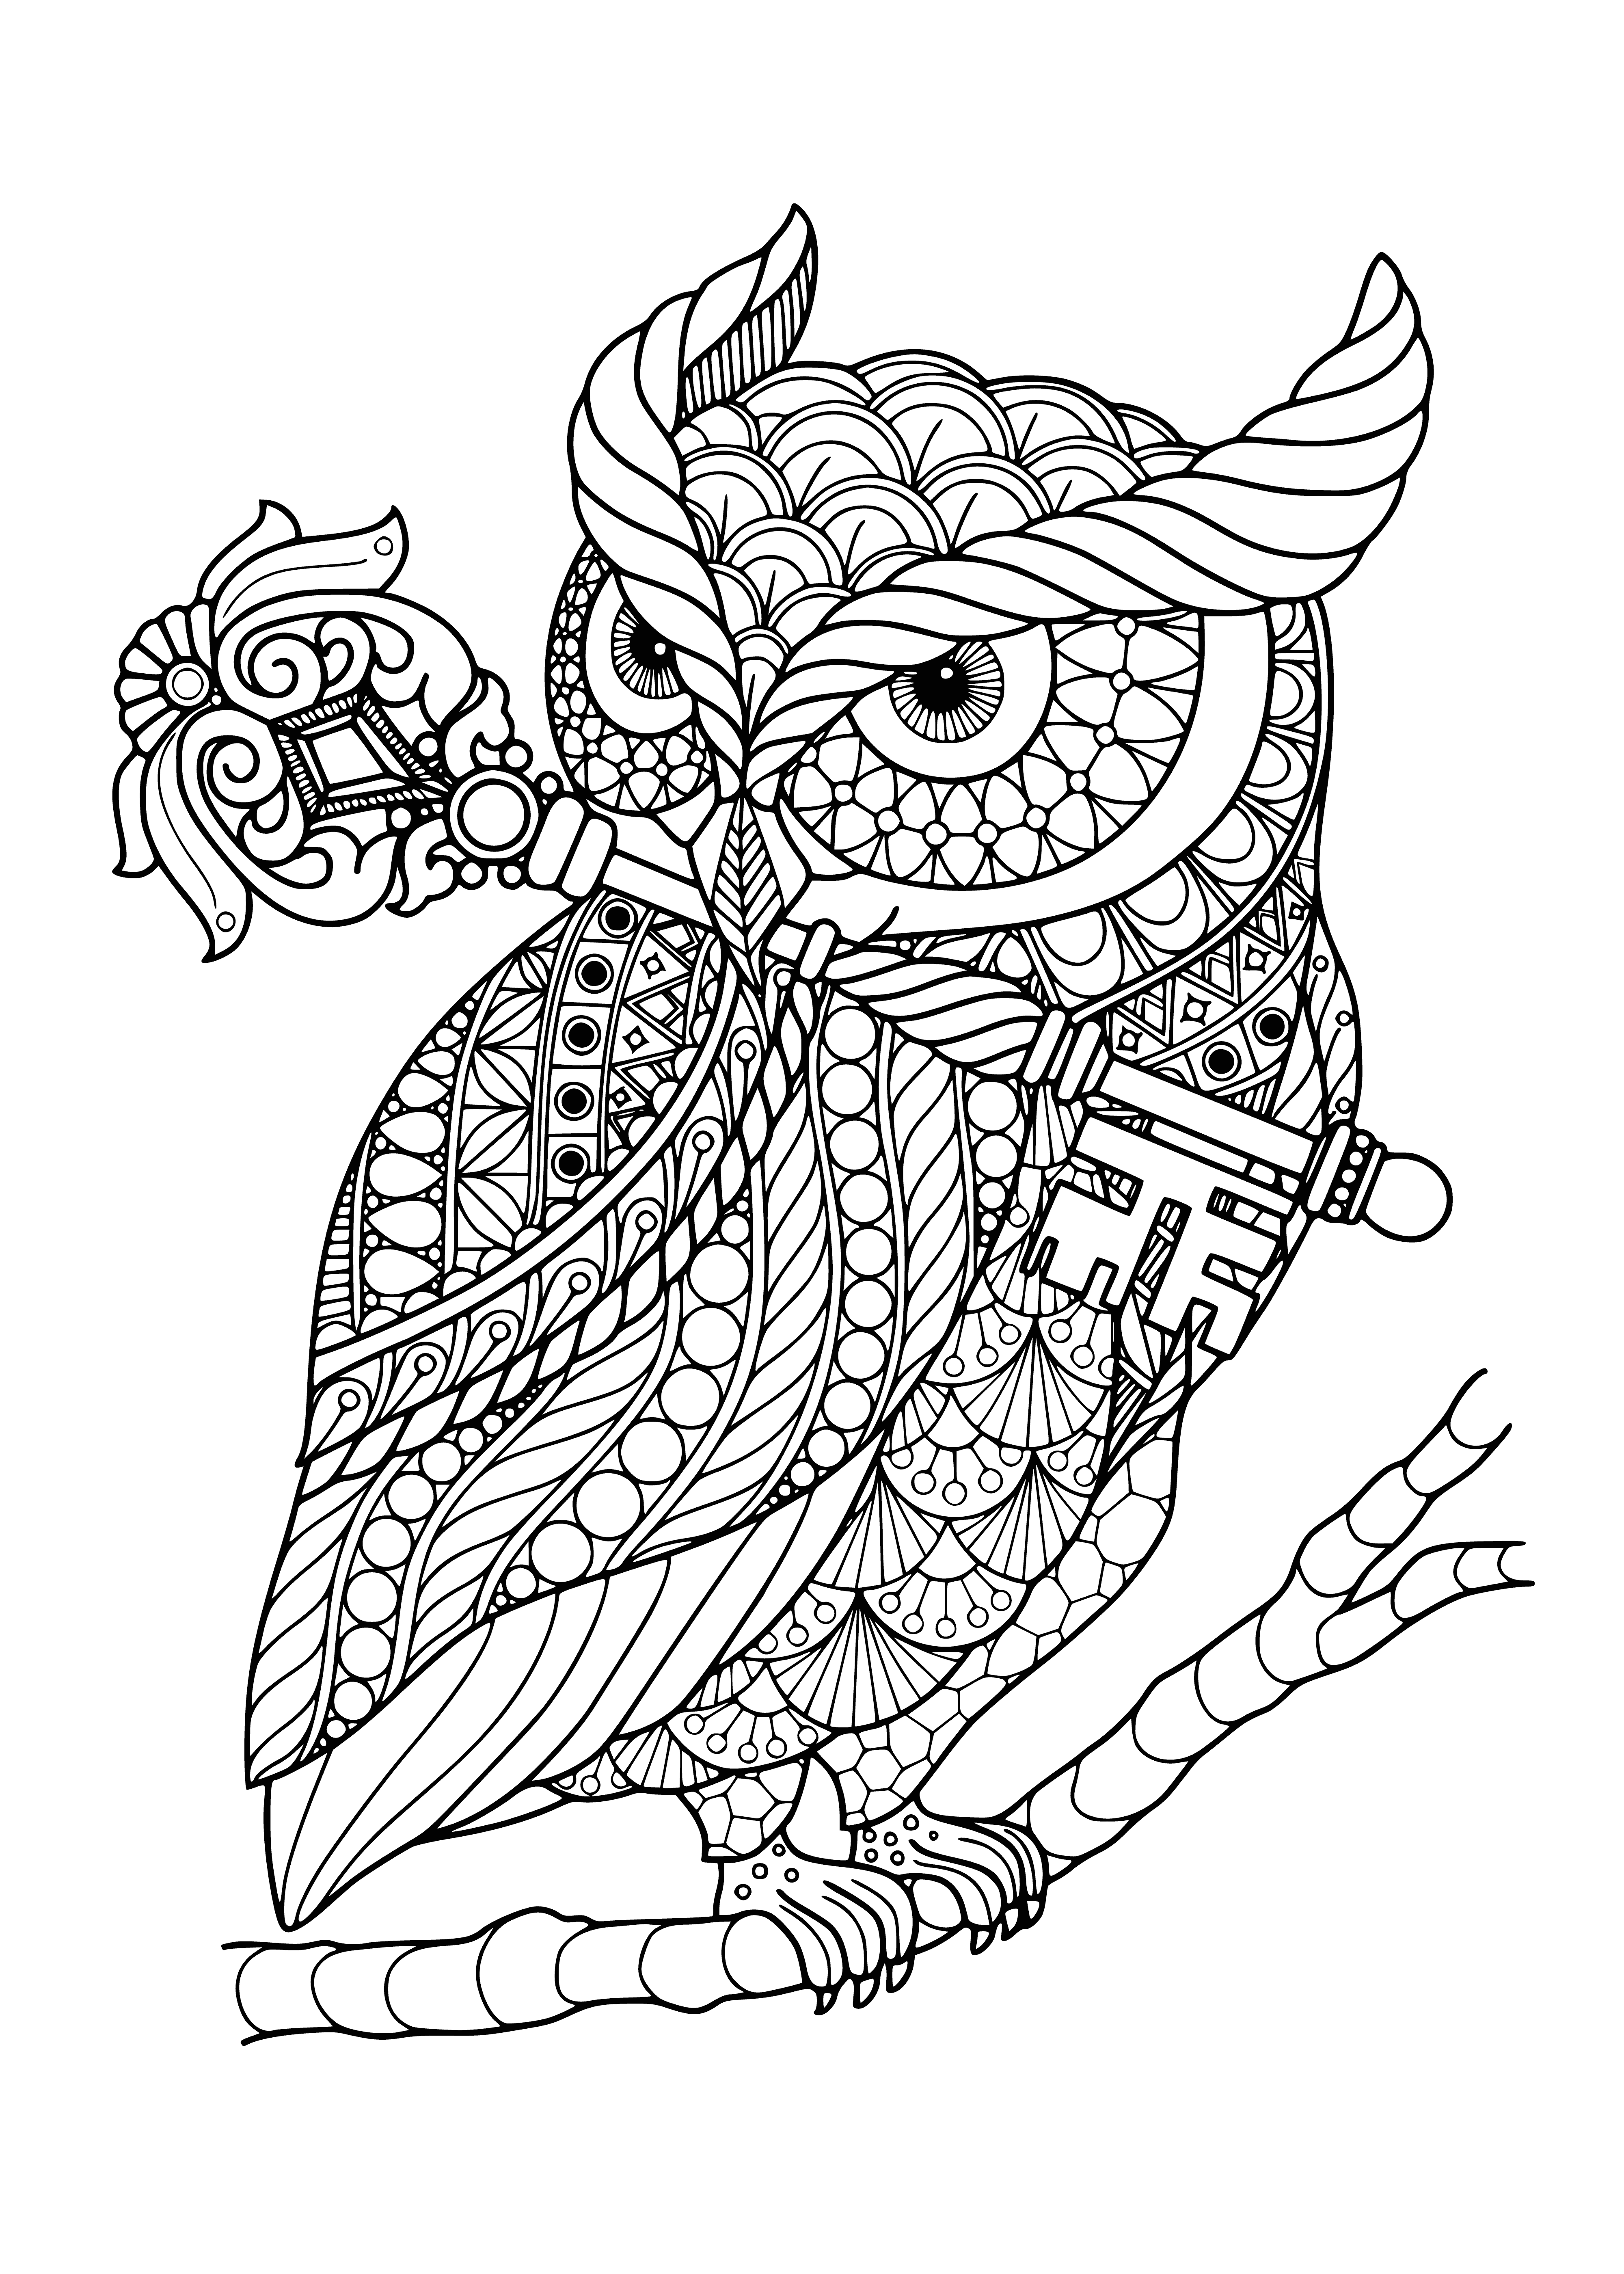 Owl with a key coloring page